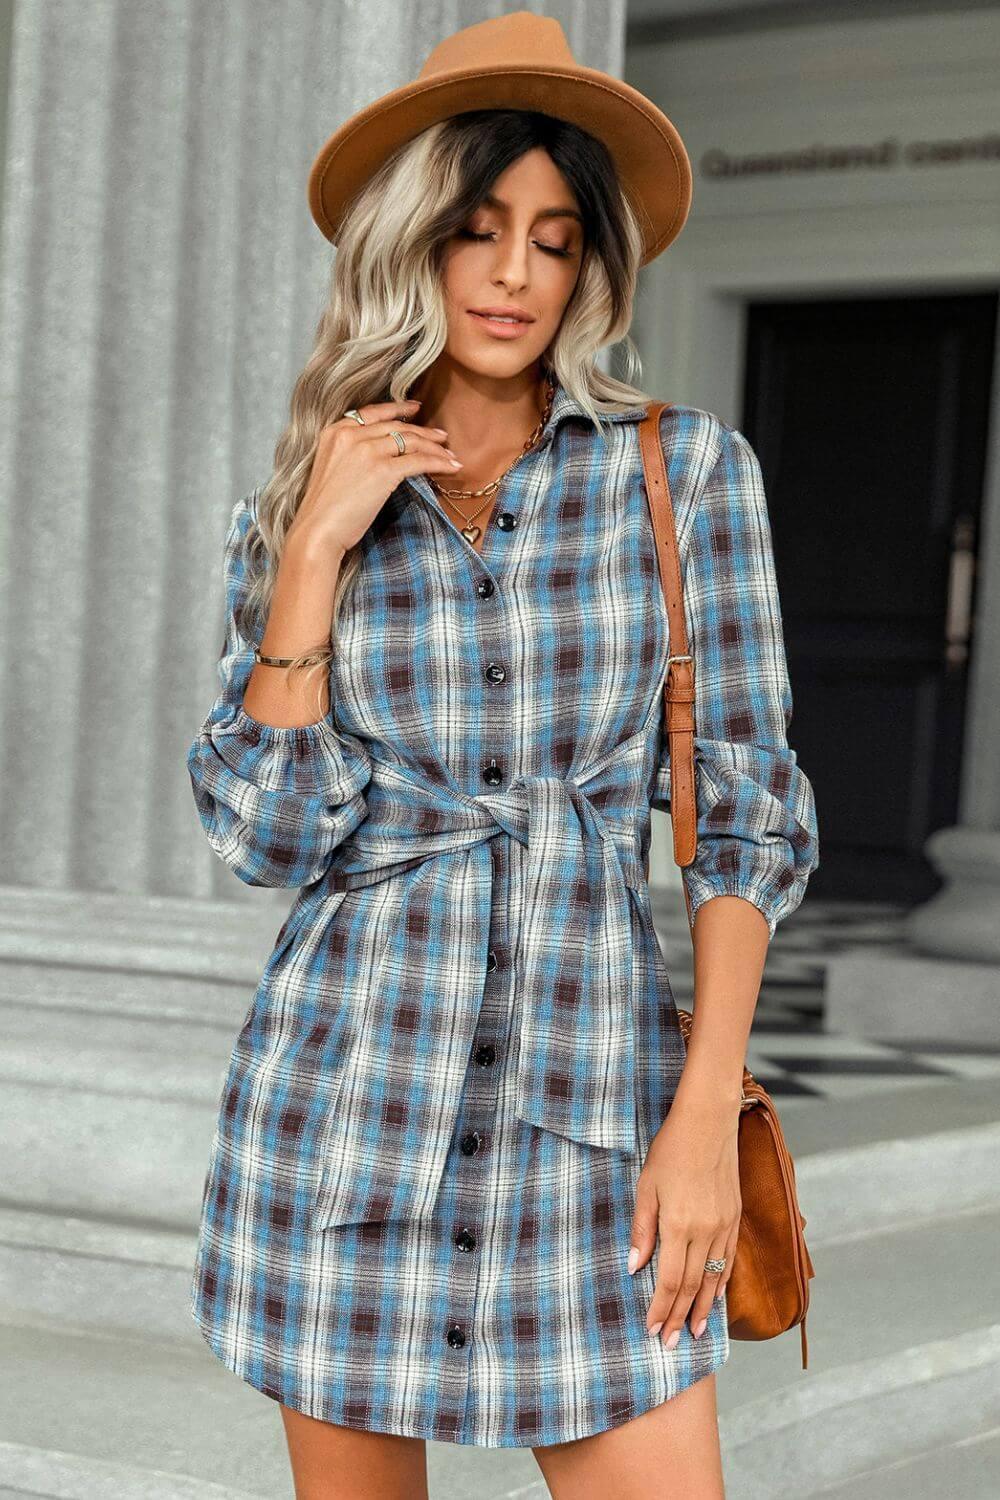 Buffalo Plaid Shirt Dress - a blue plaid shirt dress that has button front v-neck and a tie front #Firefly Lane Boutique1